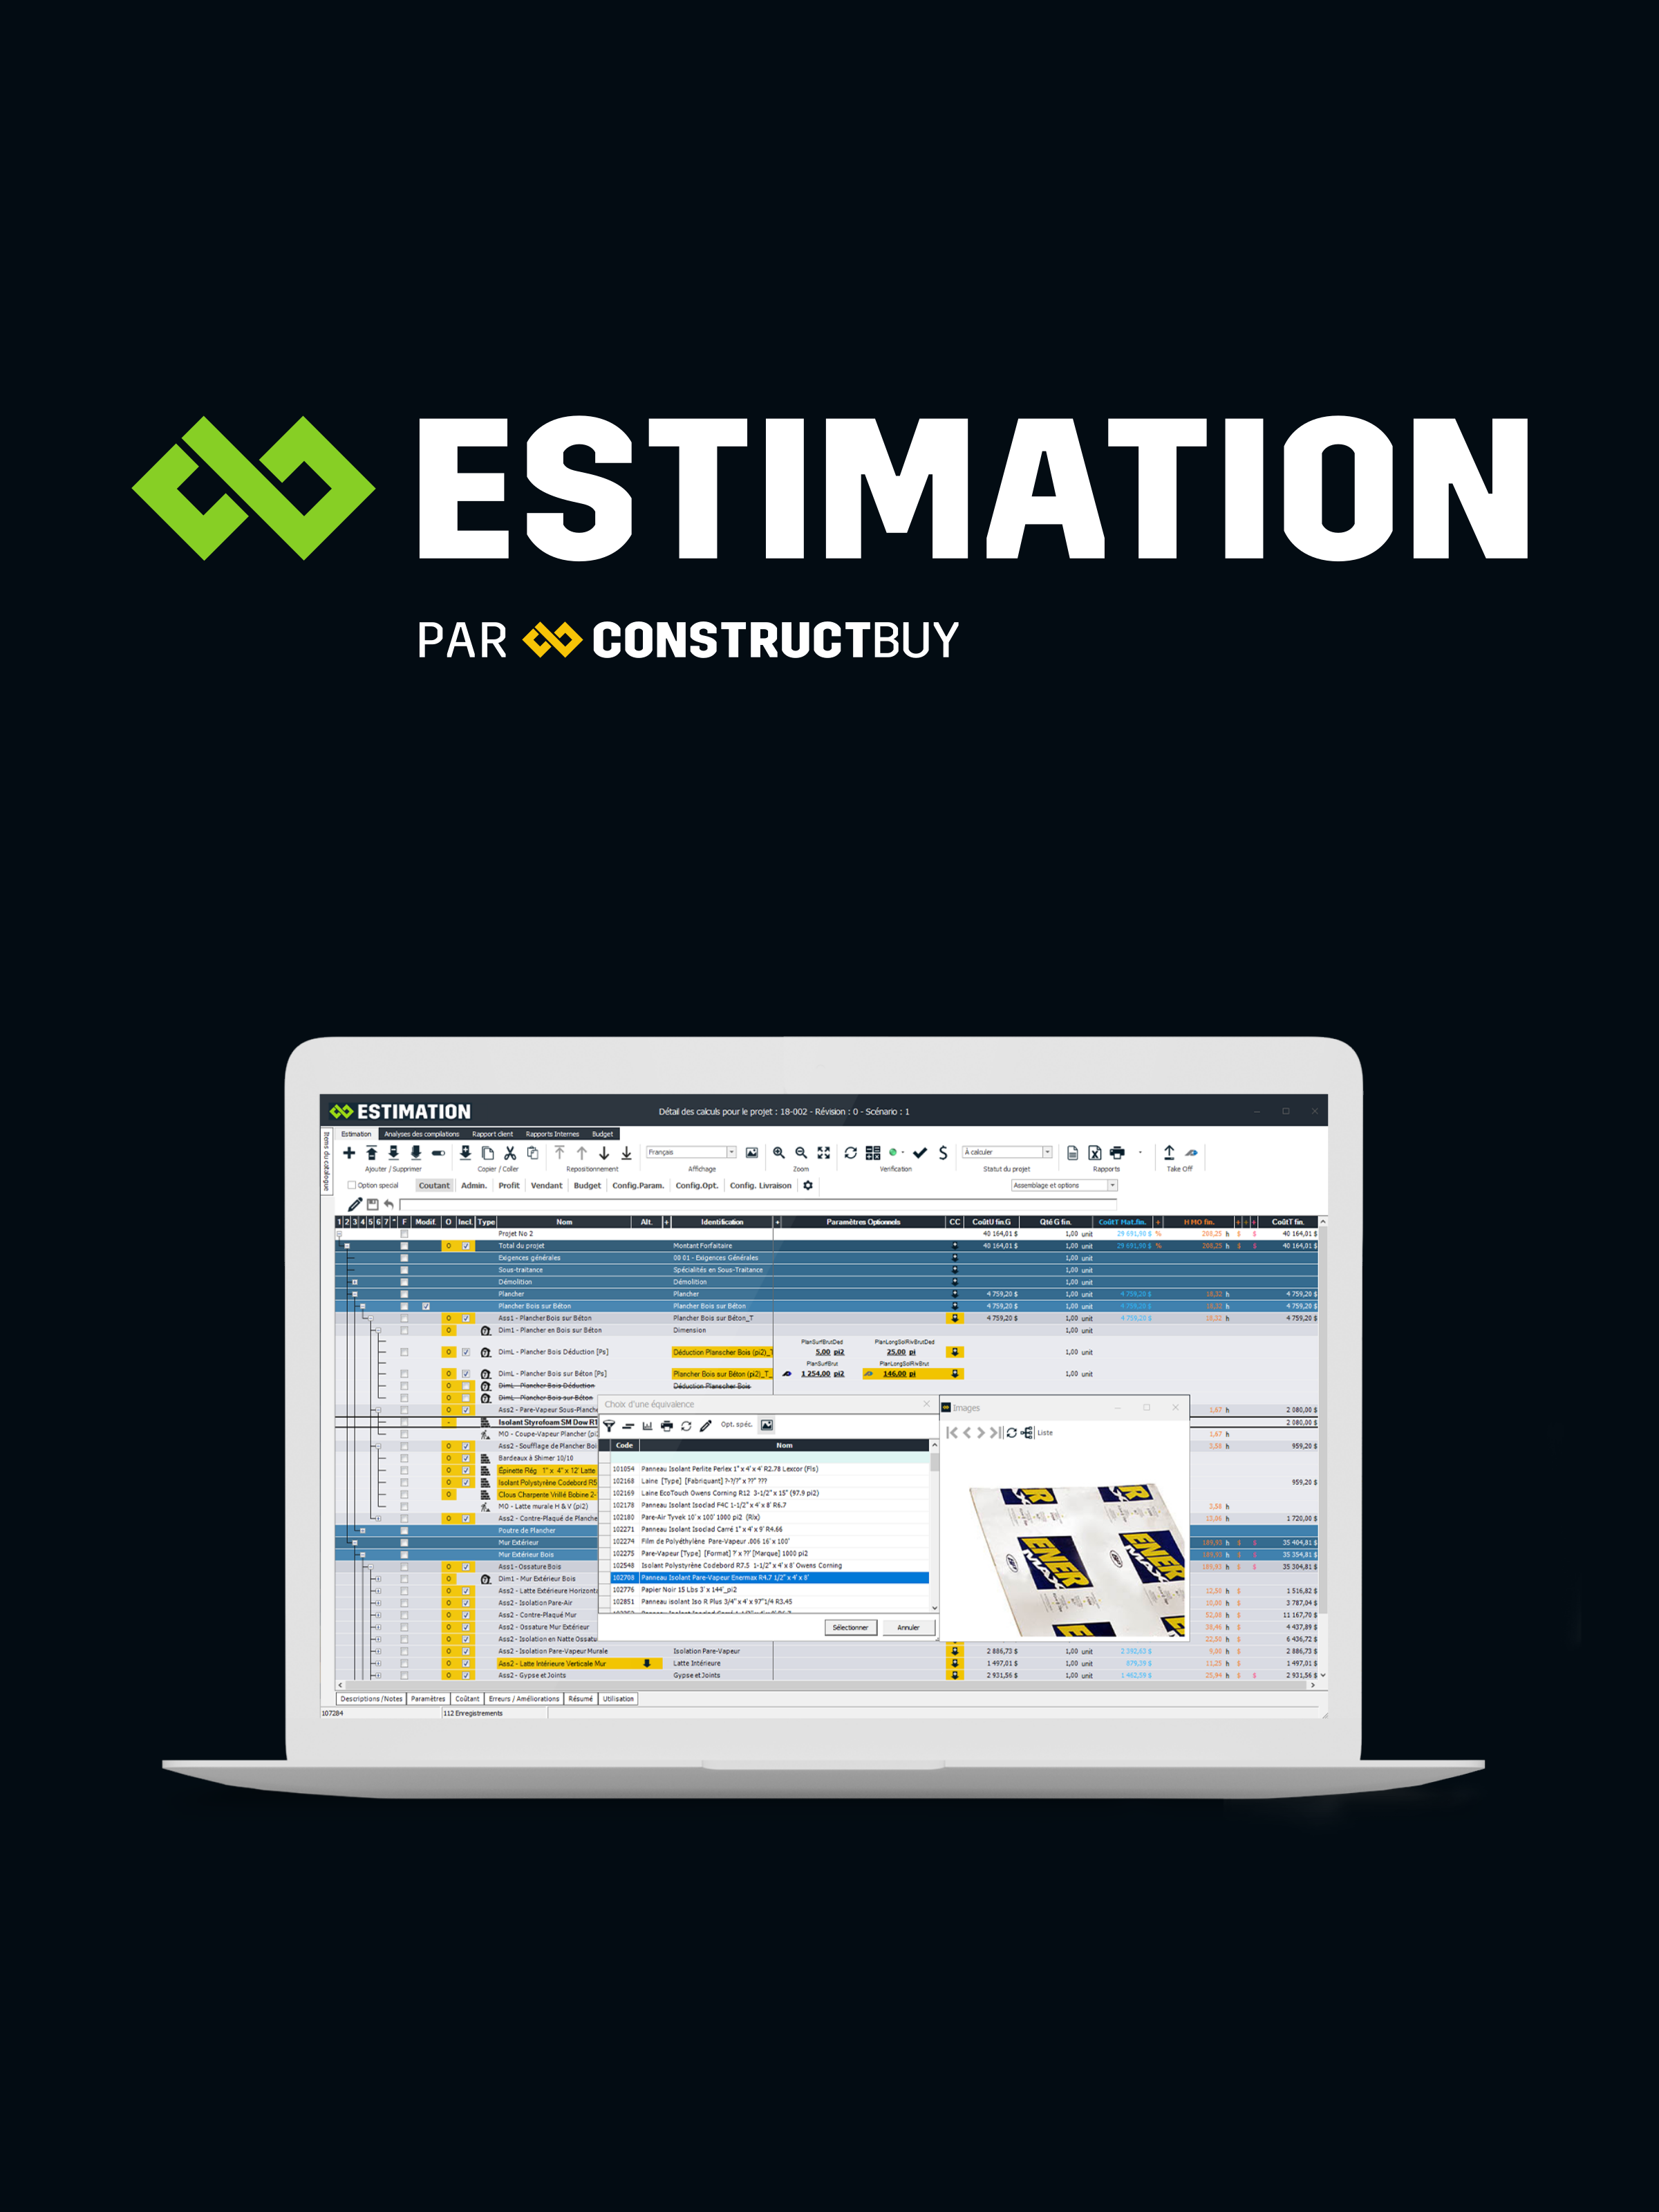 Estimating tool for construction costs. Be faster, more accurate, reliable and strategic from estimation to execution. Faithfully reproduce your calculation methods on a solid, flexible and specially designed basis for estimation.